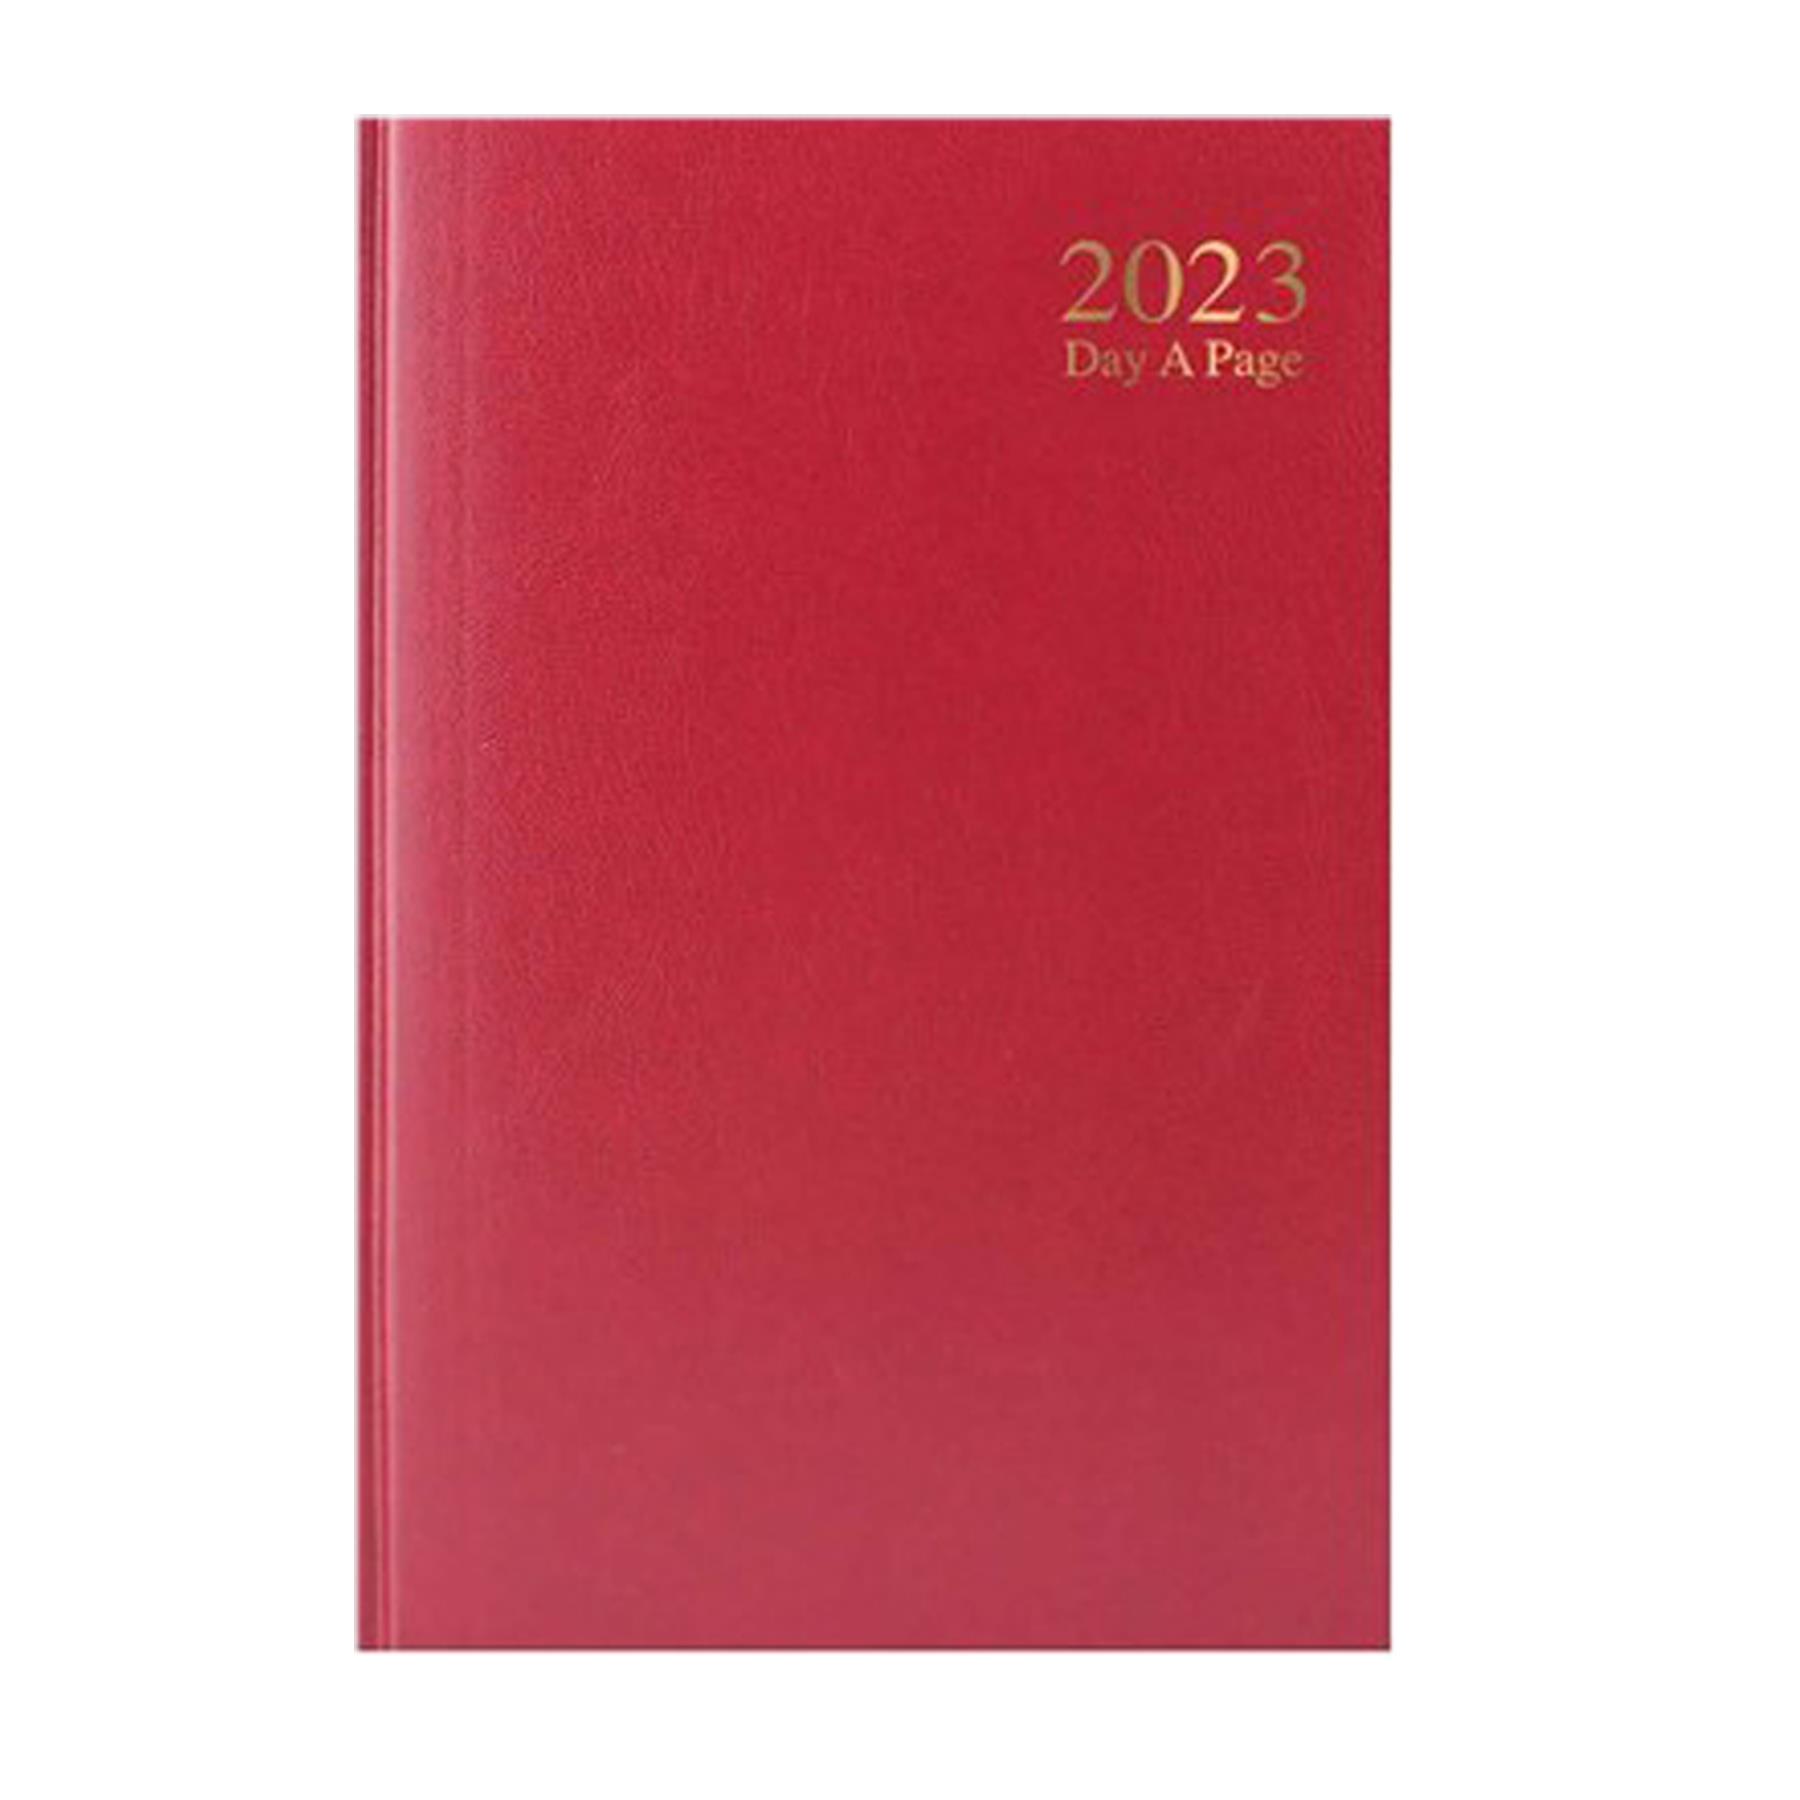 2023 A5 Hardback Day a Page Diary 3182 - Red